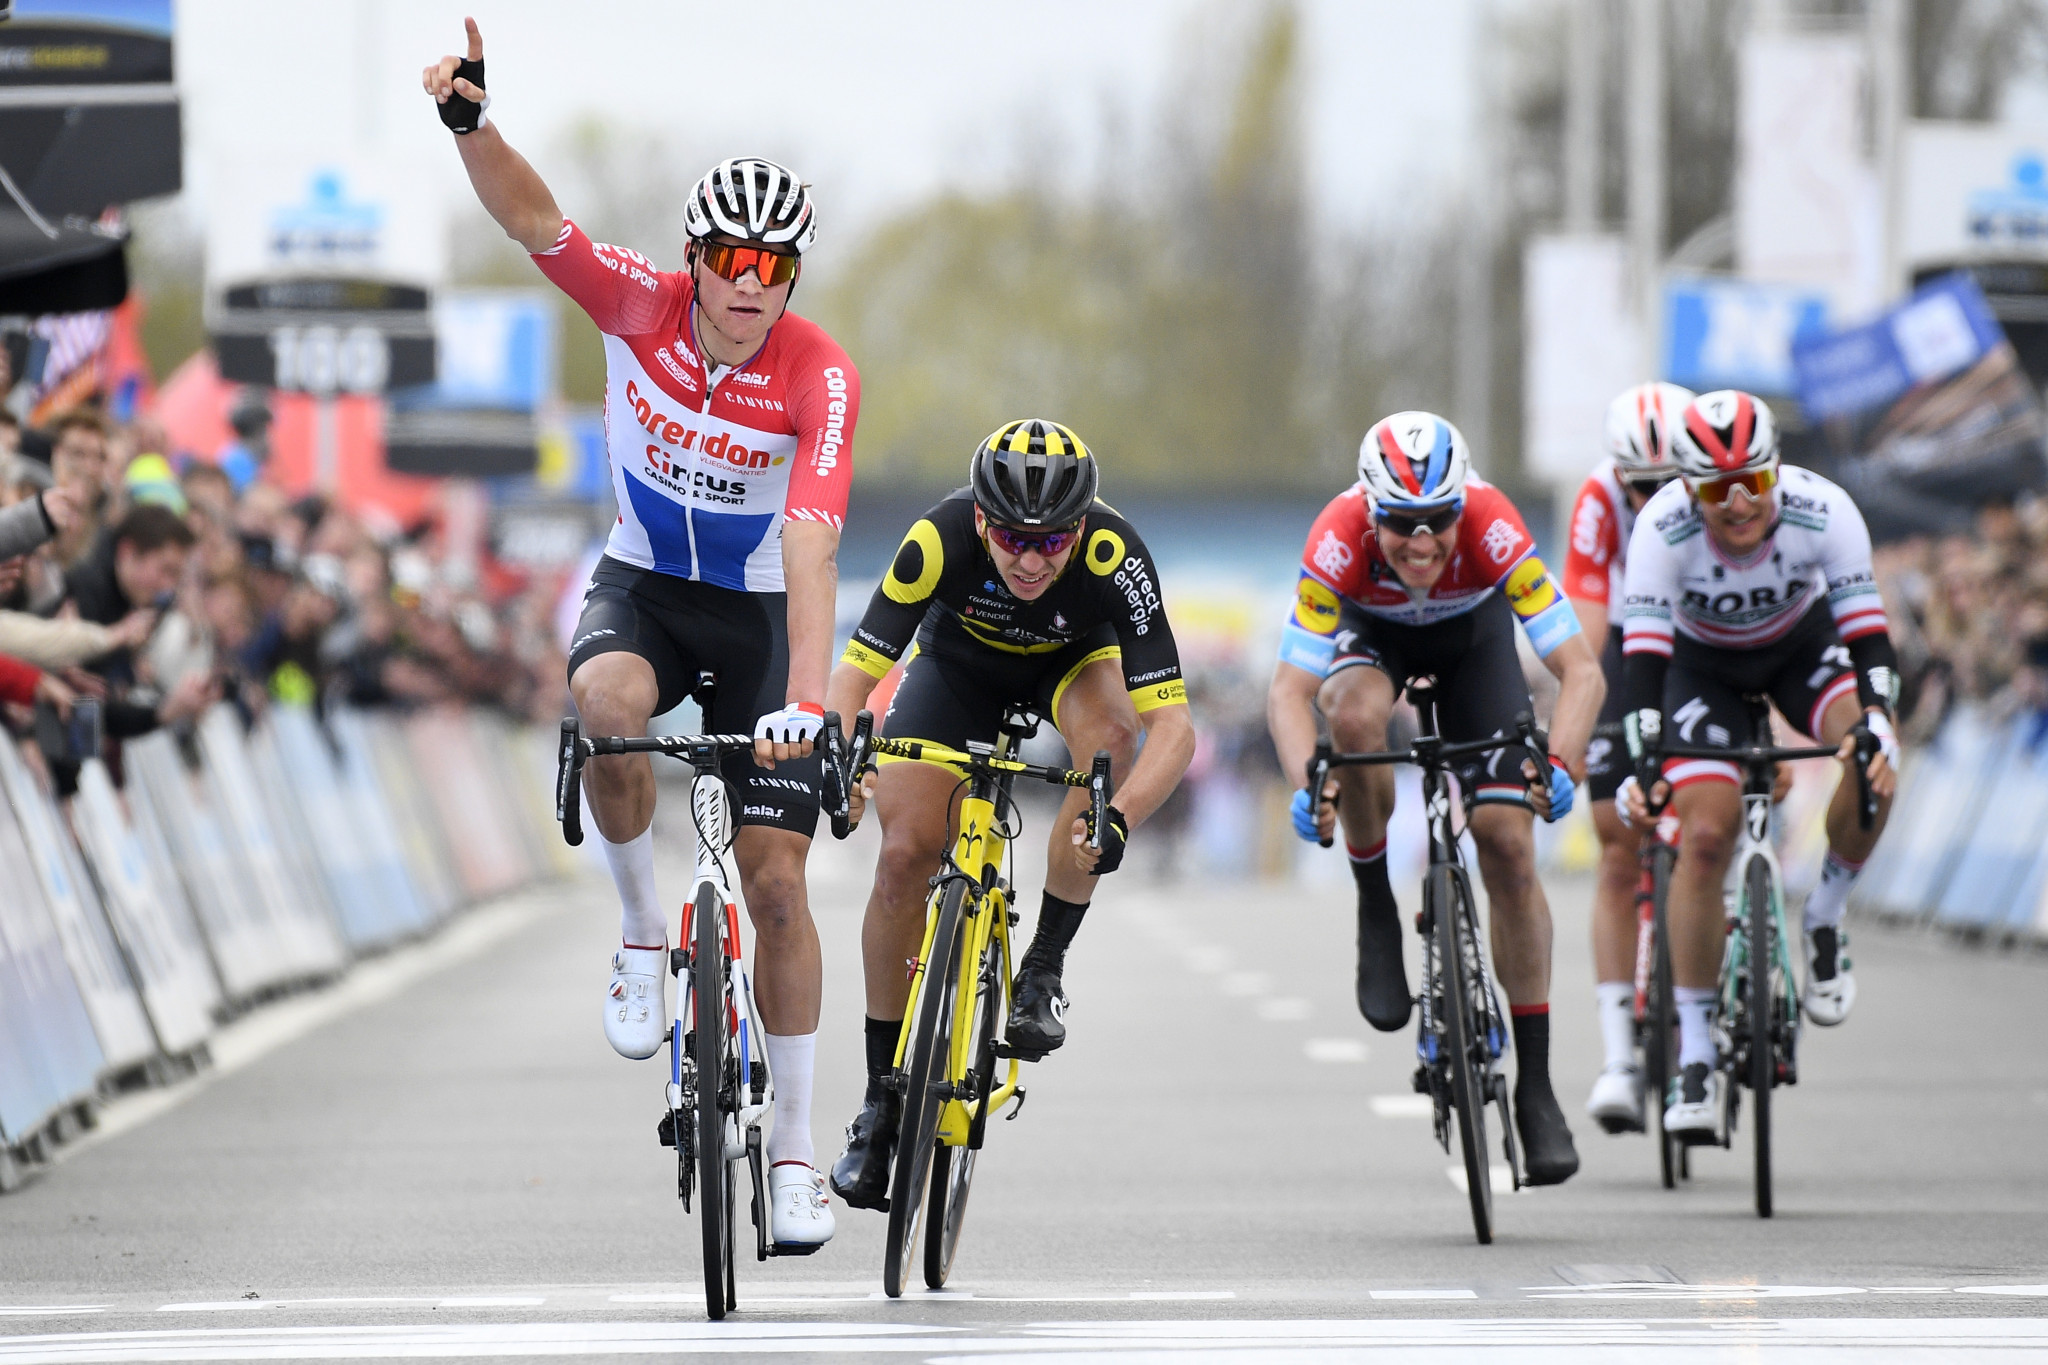 Mathieu van der Poel won the race back in 2019 ©Getty Images